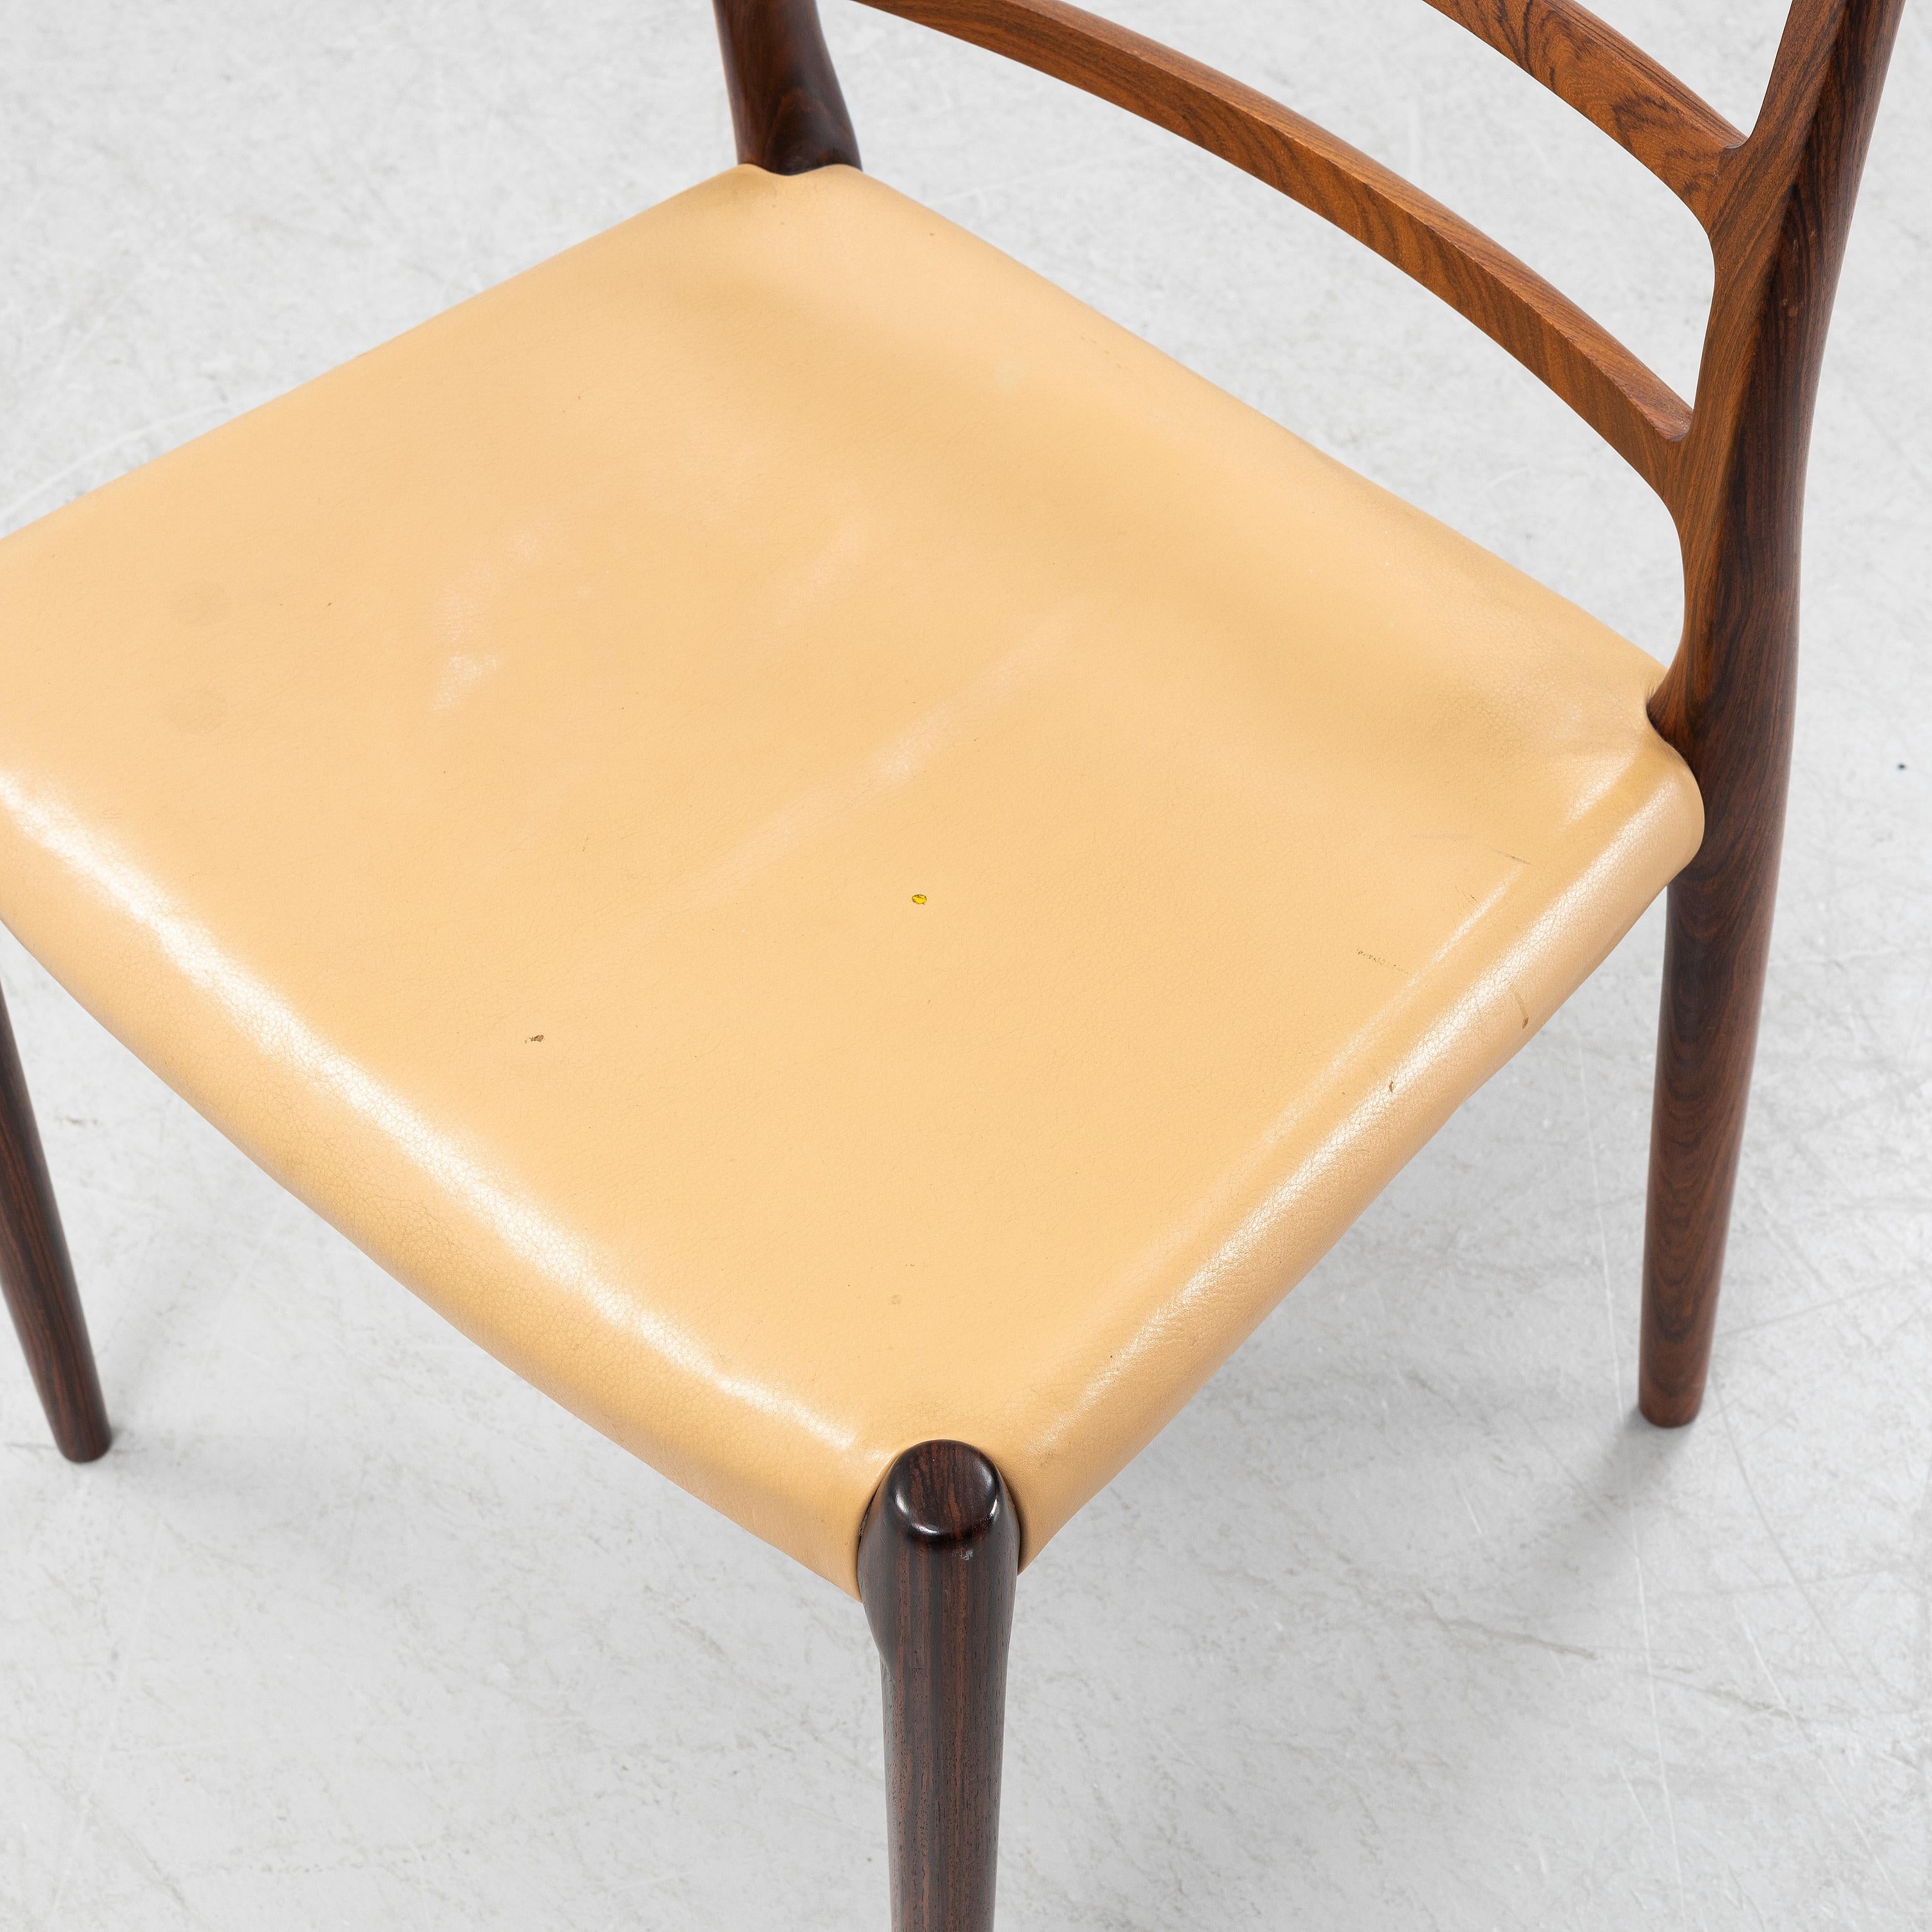 Set of 8 chairs in rio Palisander and leather by Niels Otto Moller for J.L. Mollers Denmark 
Model N° 82 with hight back
Good condition

Born in Århus in 1920, the work of Danish designer Niels Otto Møller earned a reputation for consistent